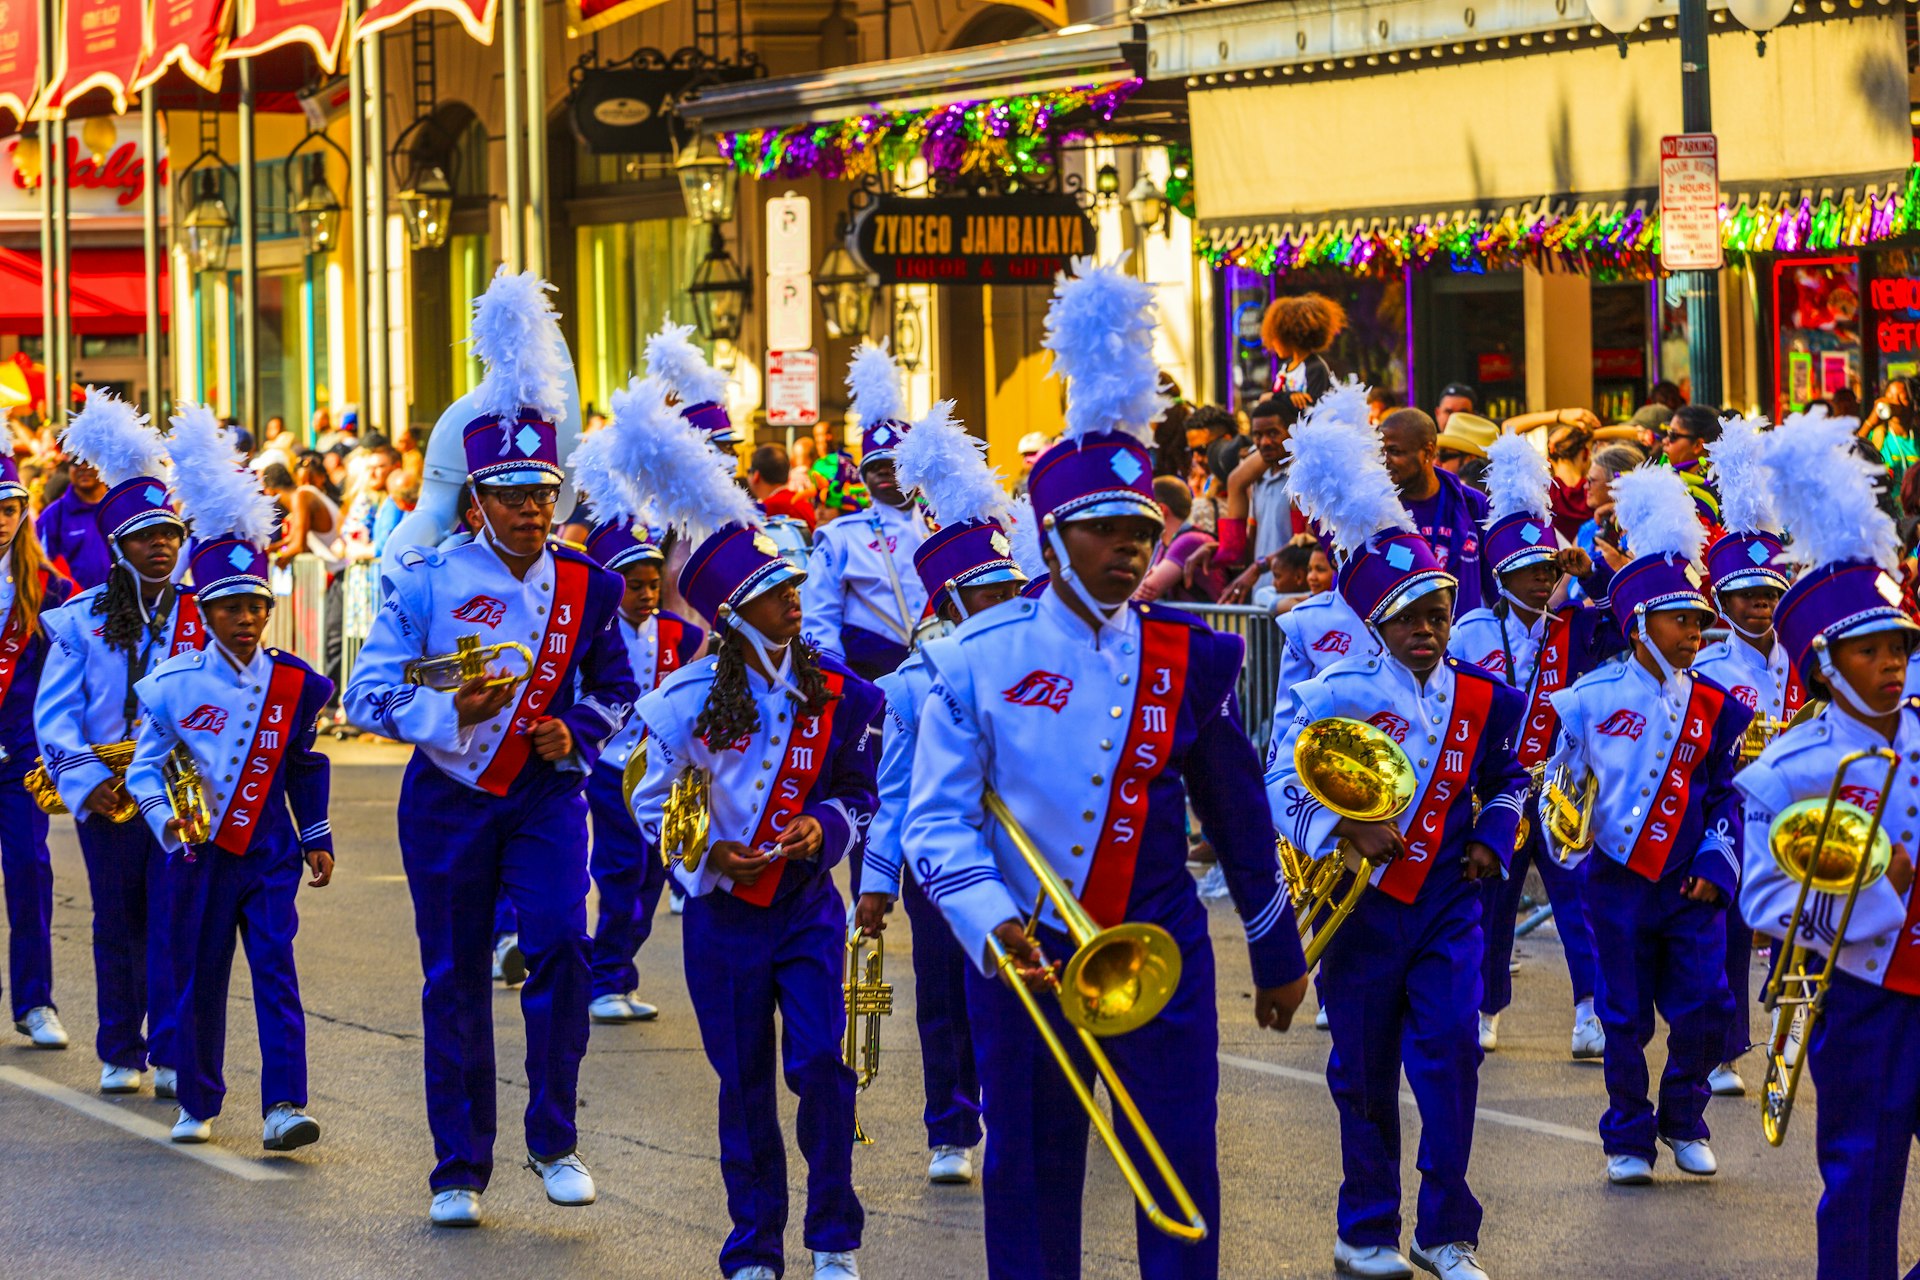 Musicians at the Mardi Gras parade march through the streets of New Orleans